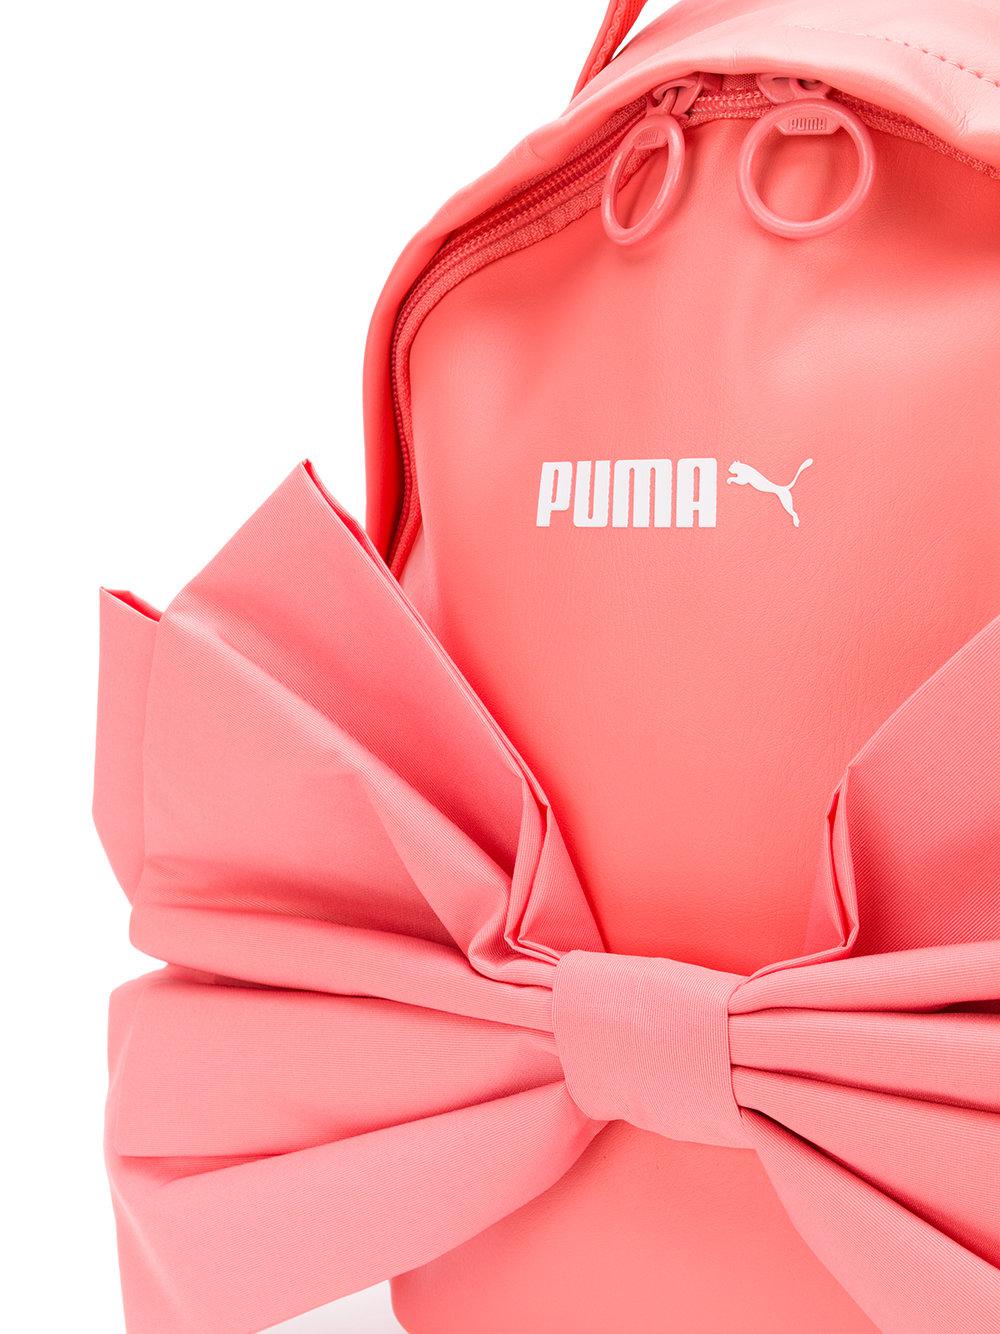 PUMA Bow Backpack in Pink | Lyst UK